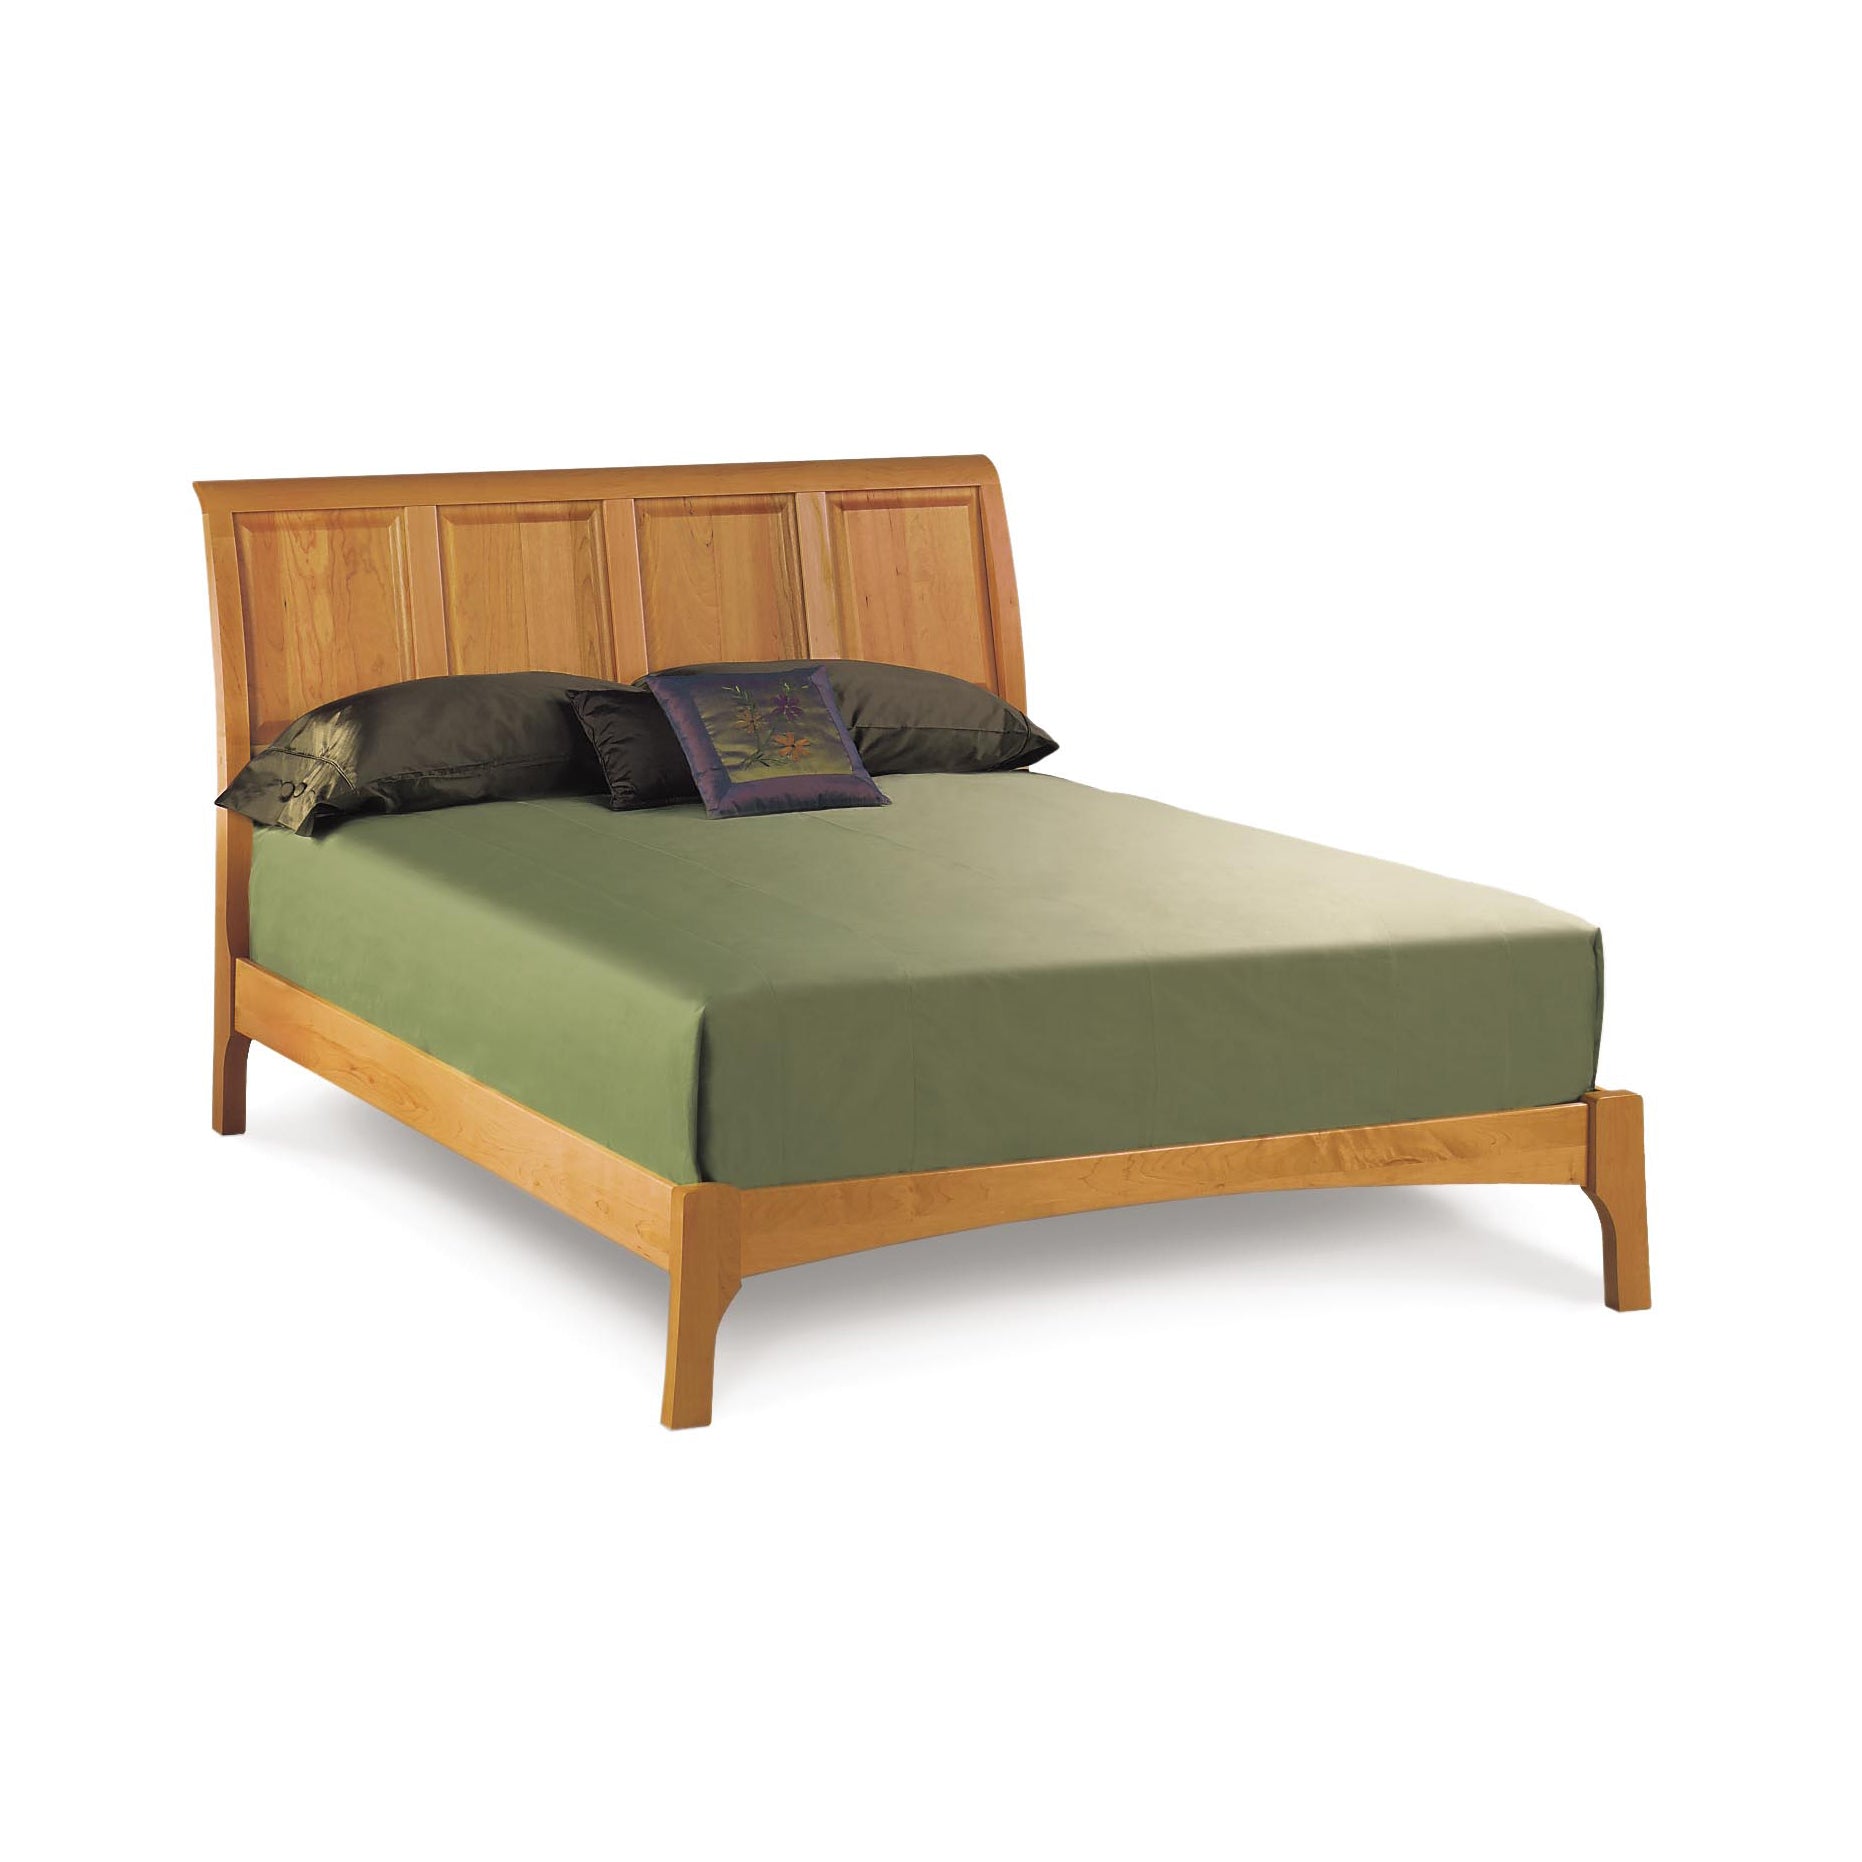 An eco-friendly Sarah Low Footboard Sleigh Bed from Copeland Furniture with a shaker design.